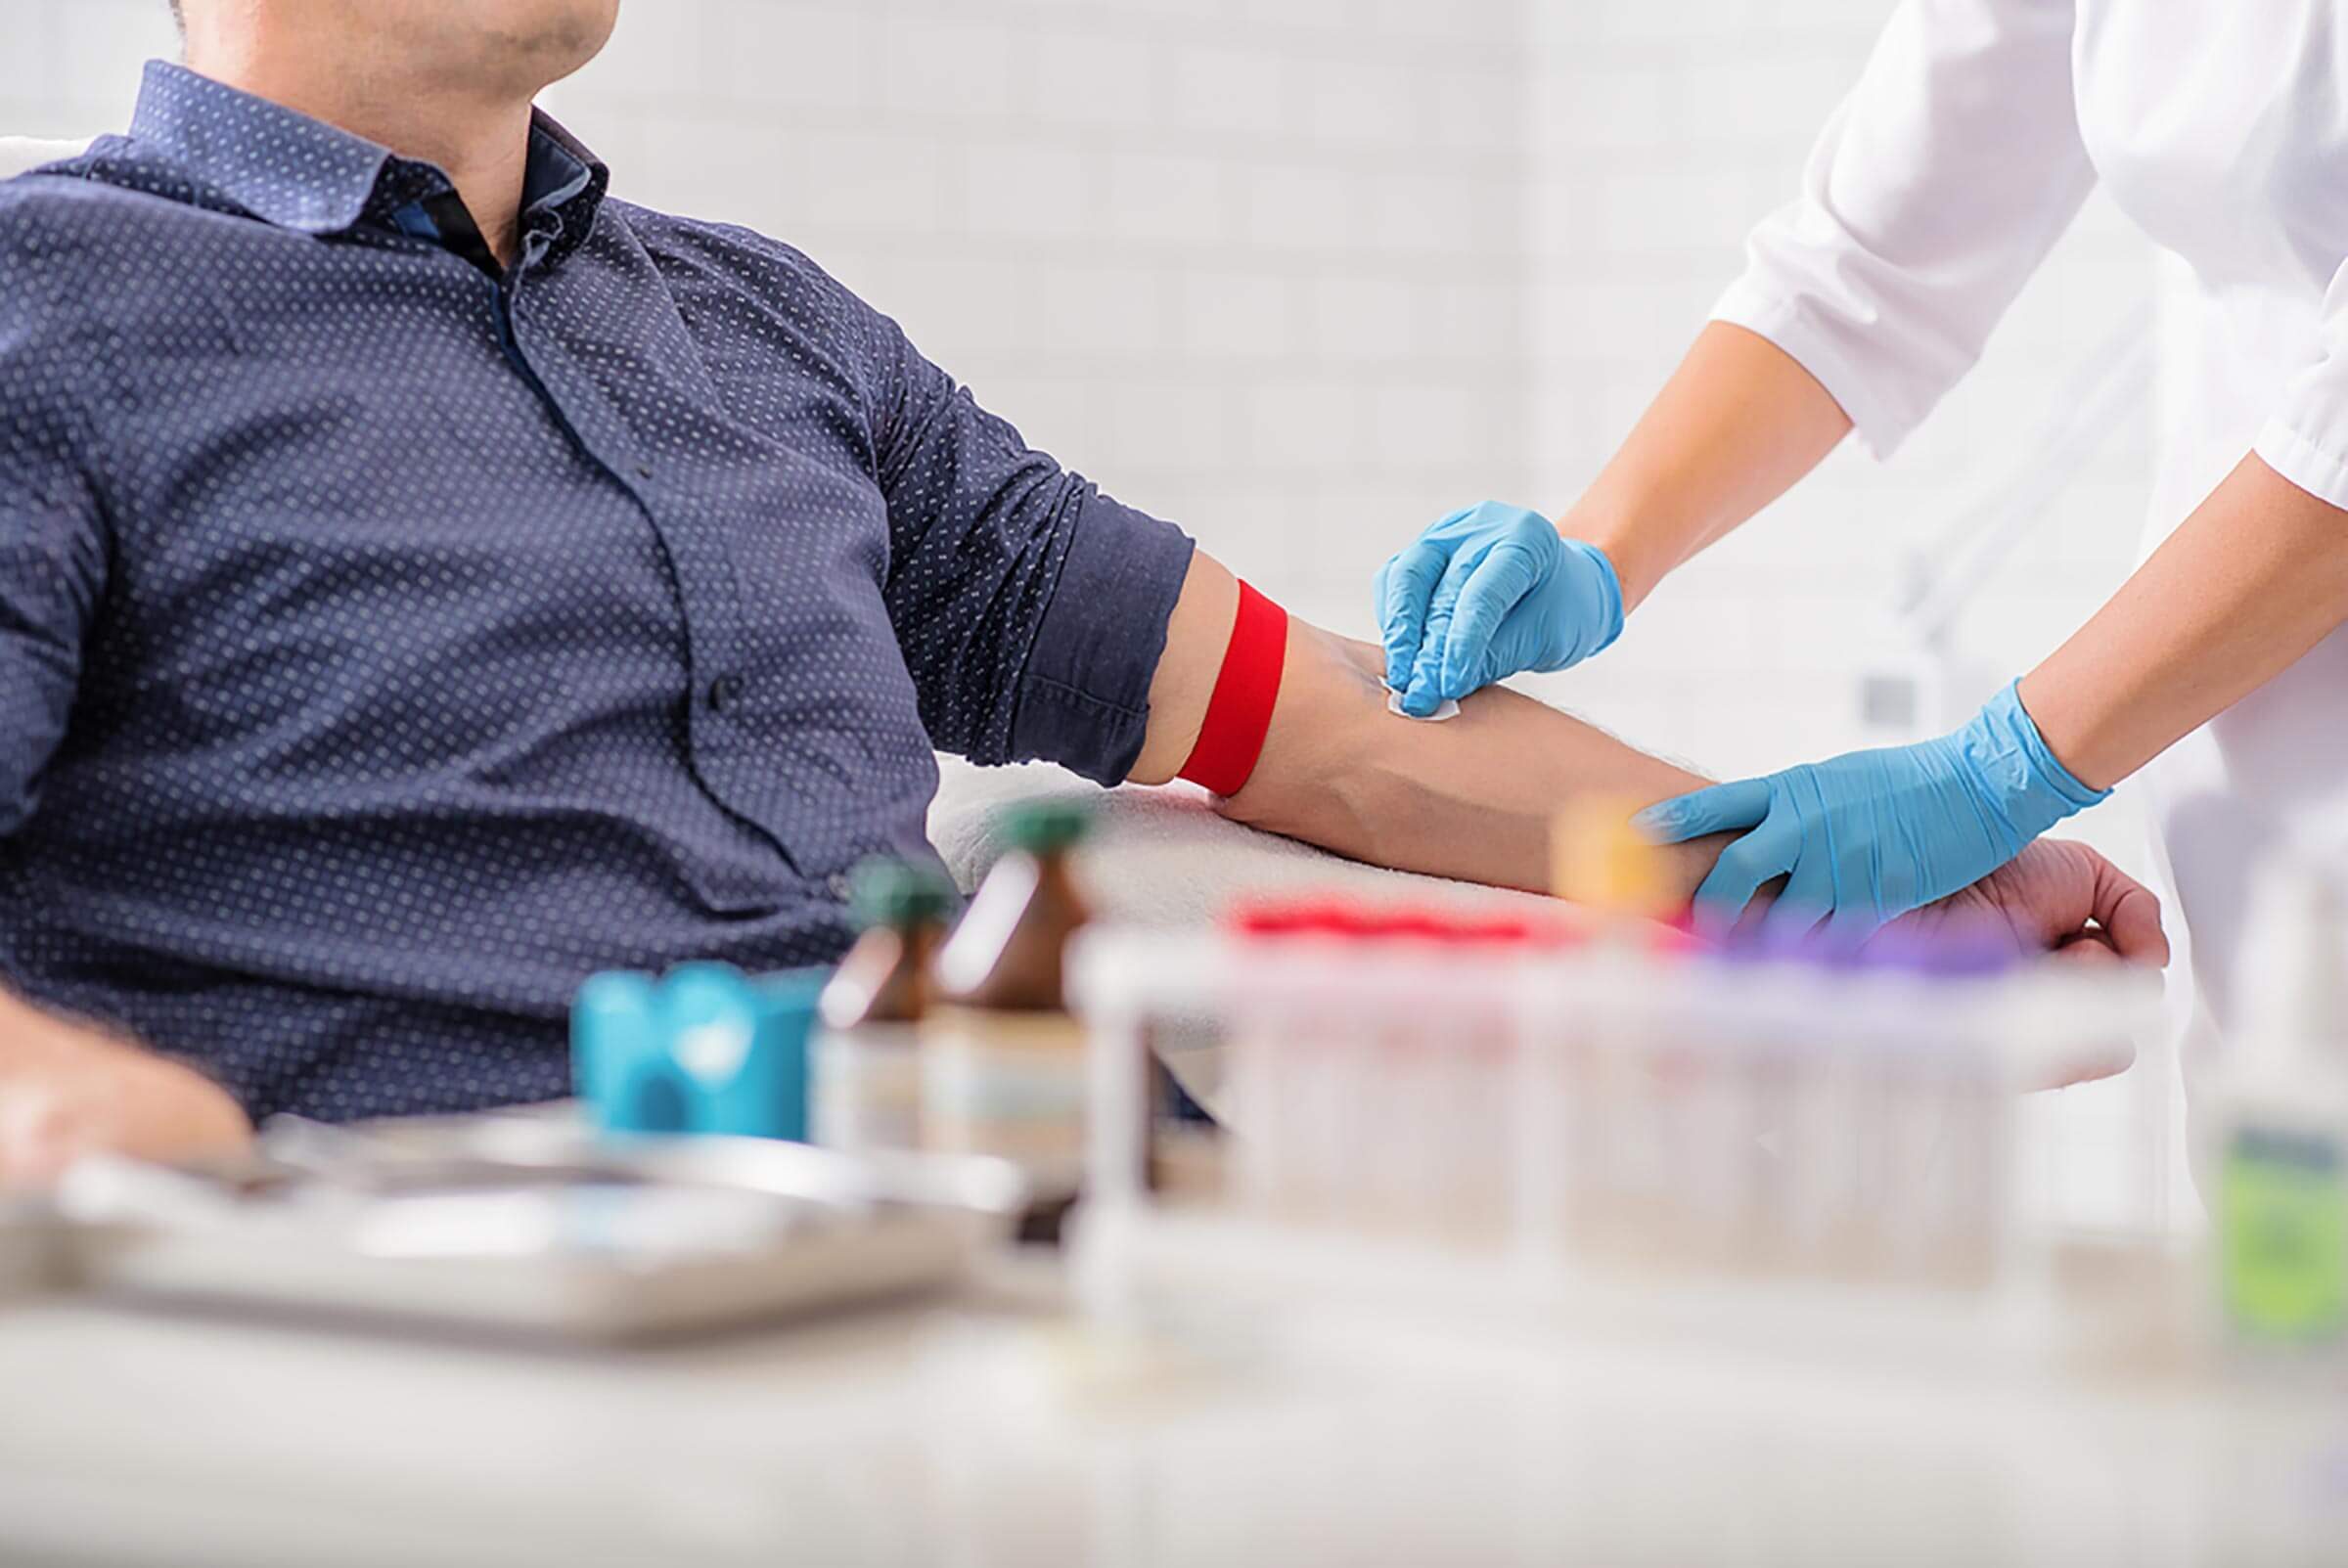 The Important Blood Test Your Doctor Should Be Doing—Your Heart Might Need It